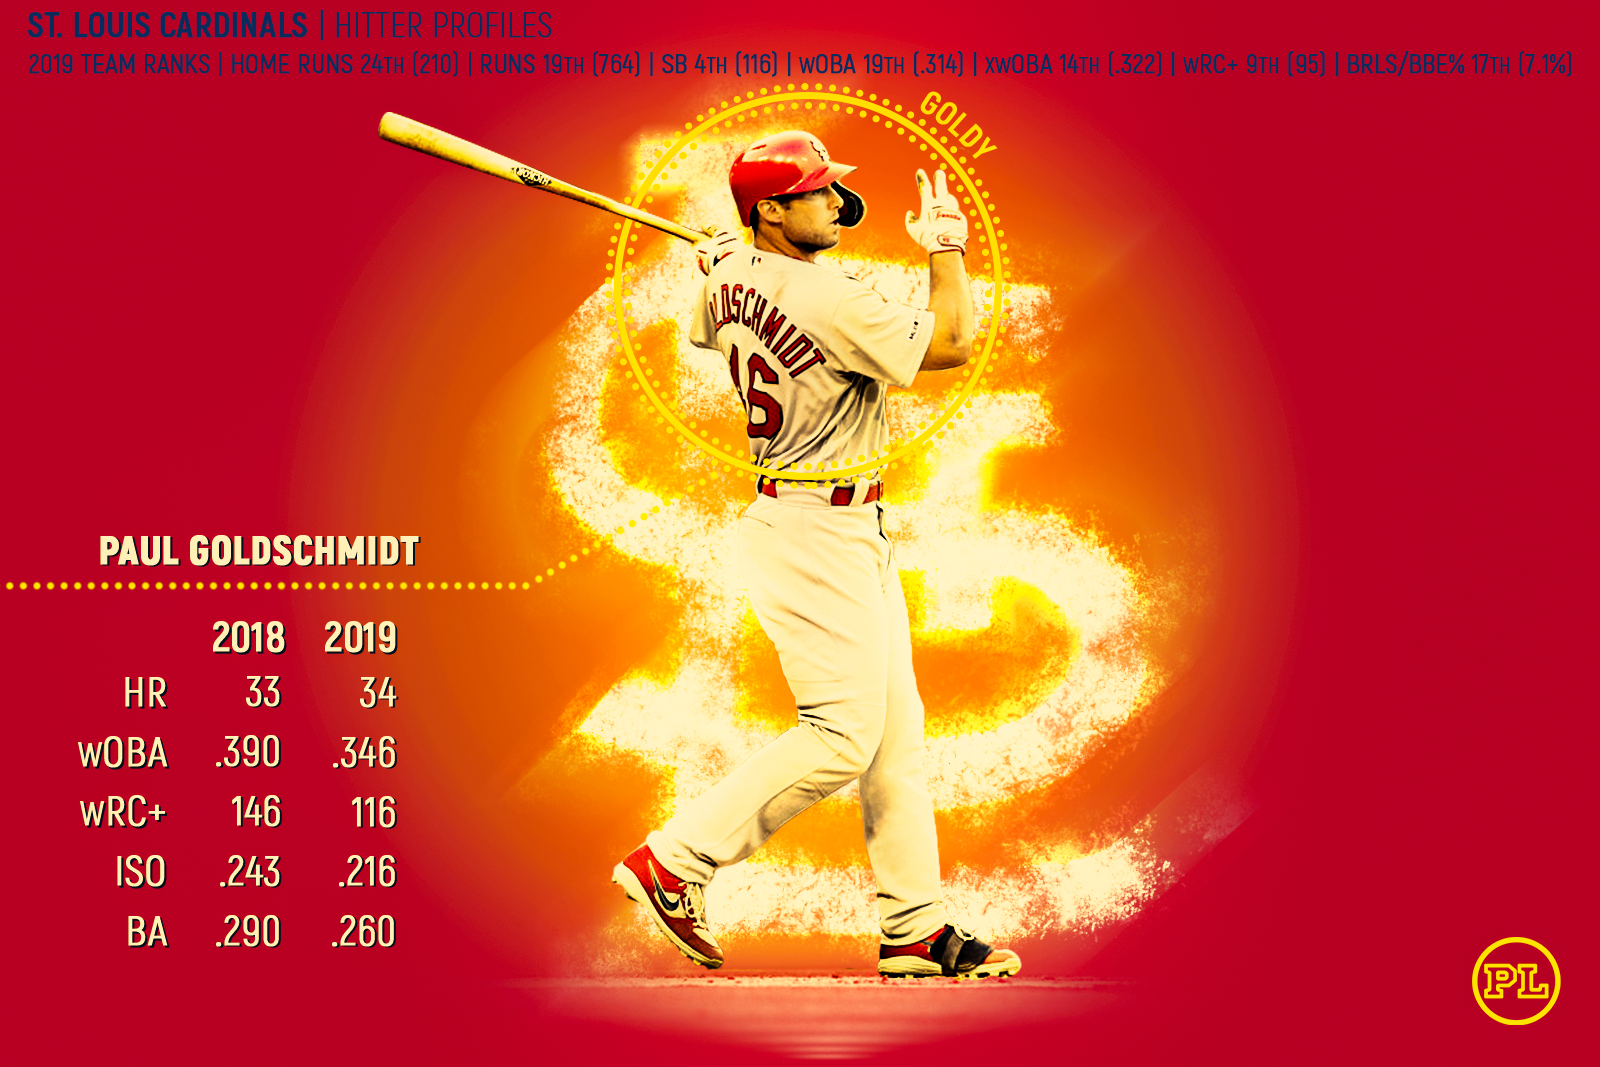 St. Louis Cardinals on X: It's not Wednesday, but we thought you could use  some new wallpaper! #STLCards